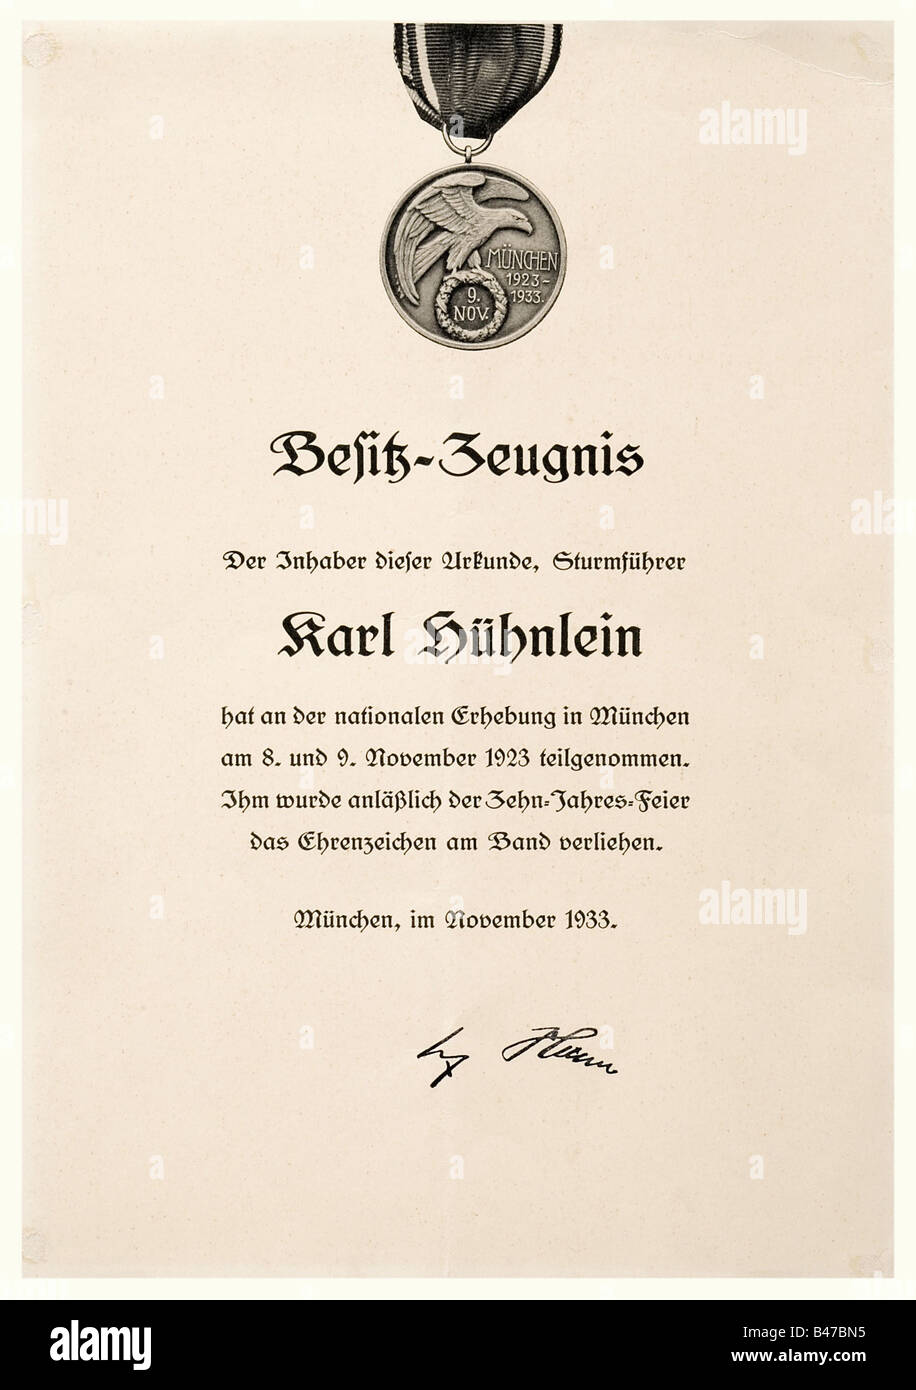 Ehrenzeichen vom 8./9. November 1923 (Blood Order), award document, 1st type, 1933 Monochrome printed, single-sided award certificate on thin, yellowish cardboard, 22.2 x 31.7 cm, at the top is a photographic depiction of the medal awarded to Karl Hühnlein (registration number 407), dated November 1933, facsimile signature of Hitler in lower portion. Small warp, traces of glue from a former mounting. Included is an award certificate for the Cross of Honour for Front Fighters, 1935. Karl Hühnlein (b. 10 May 1900), nephew of the NSKK leader Adolf Hühnlein, was a , Stock Photo